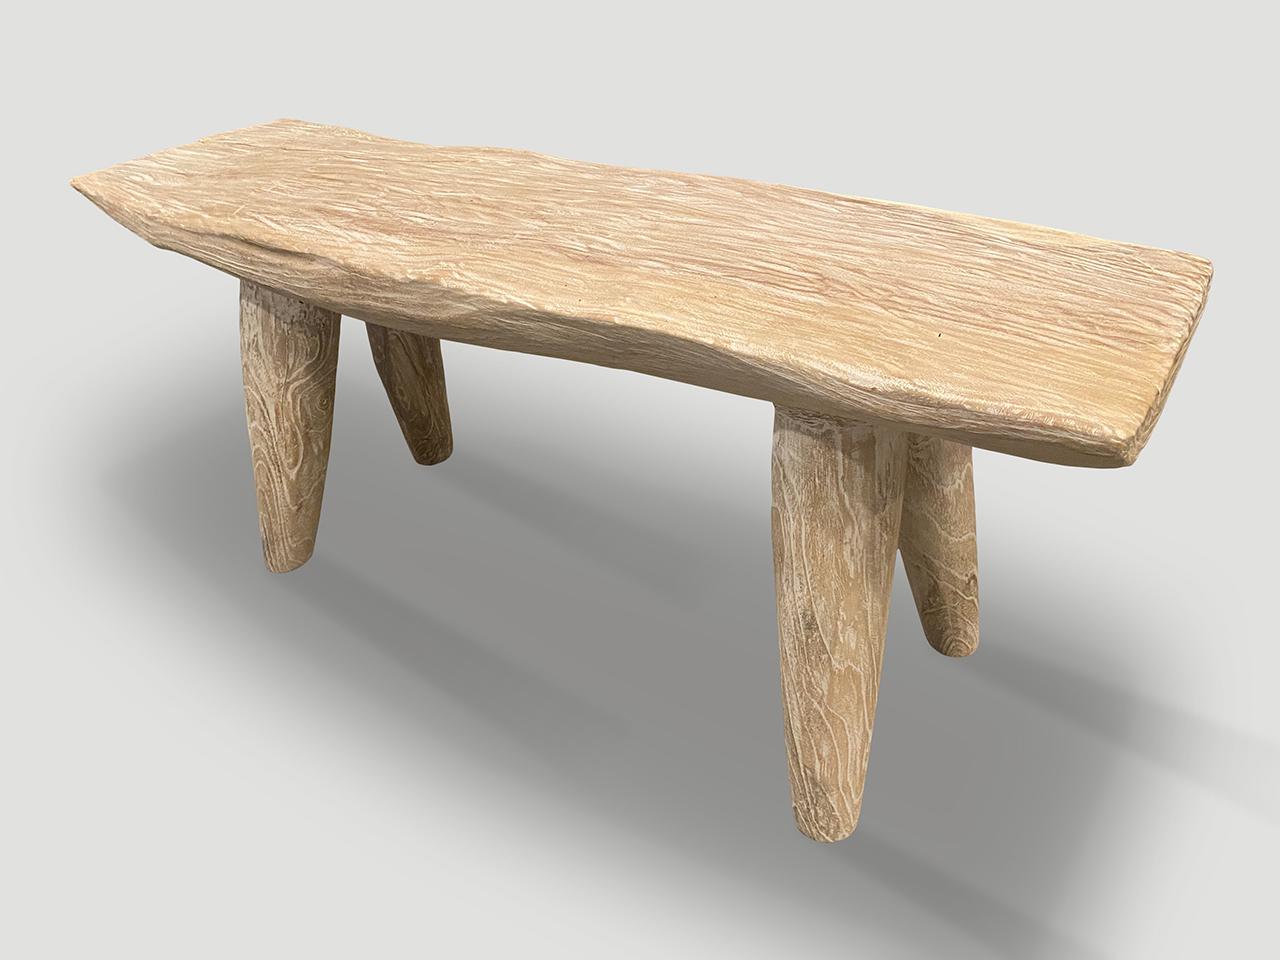 Contemporary Andrianna Shamaris St. Barts Bleached Teak Wood Bench For Sale